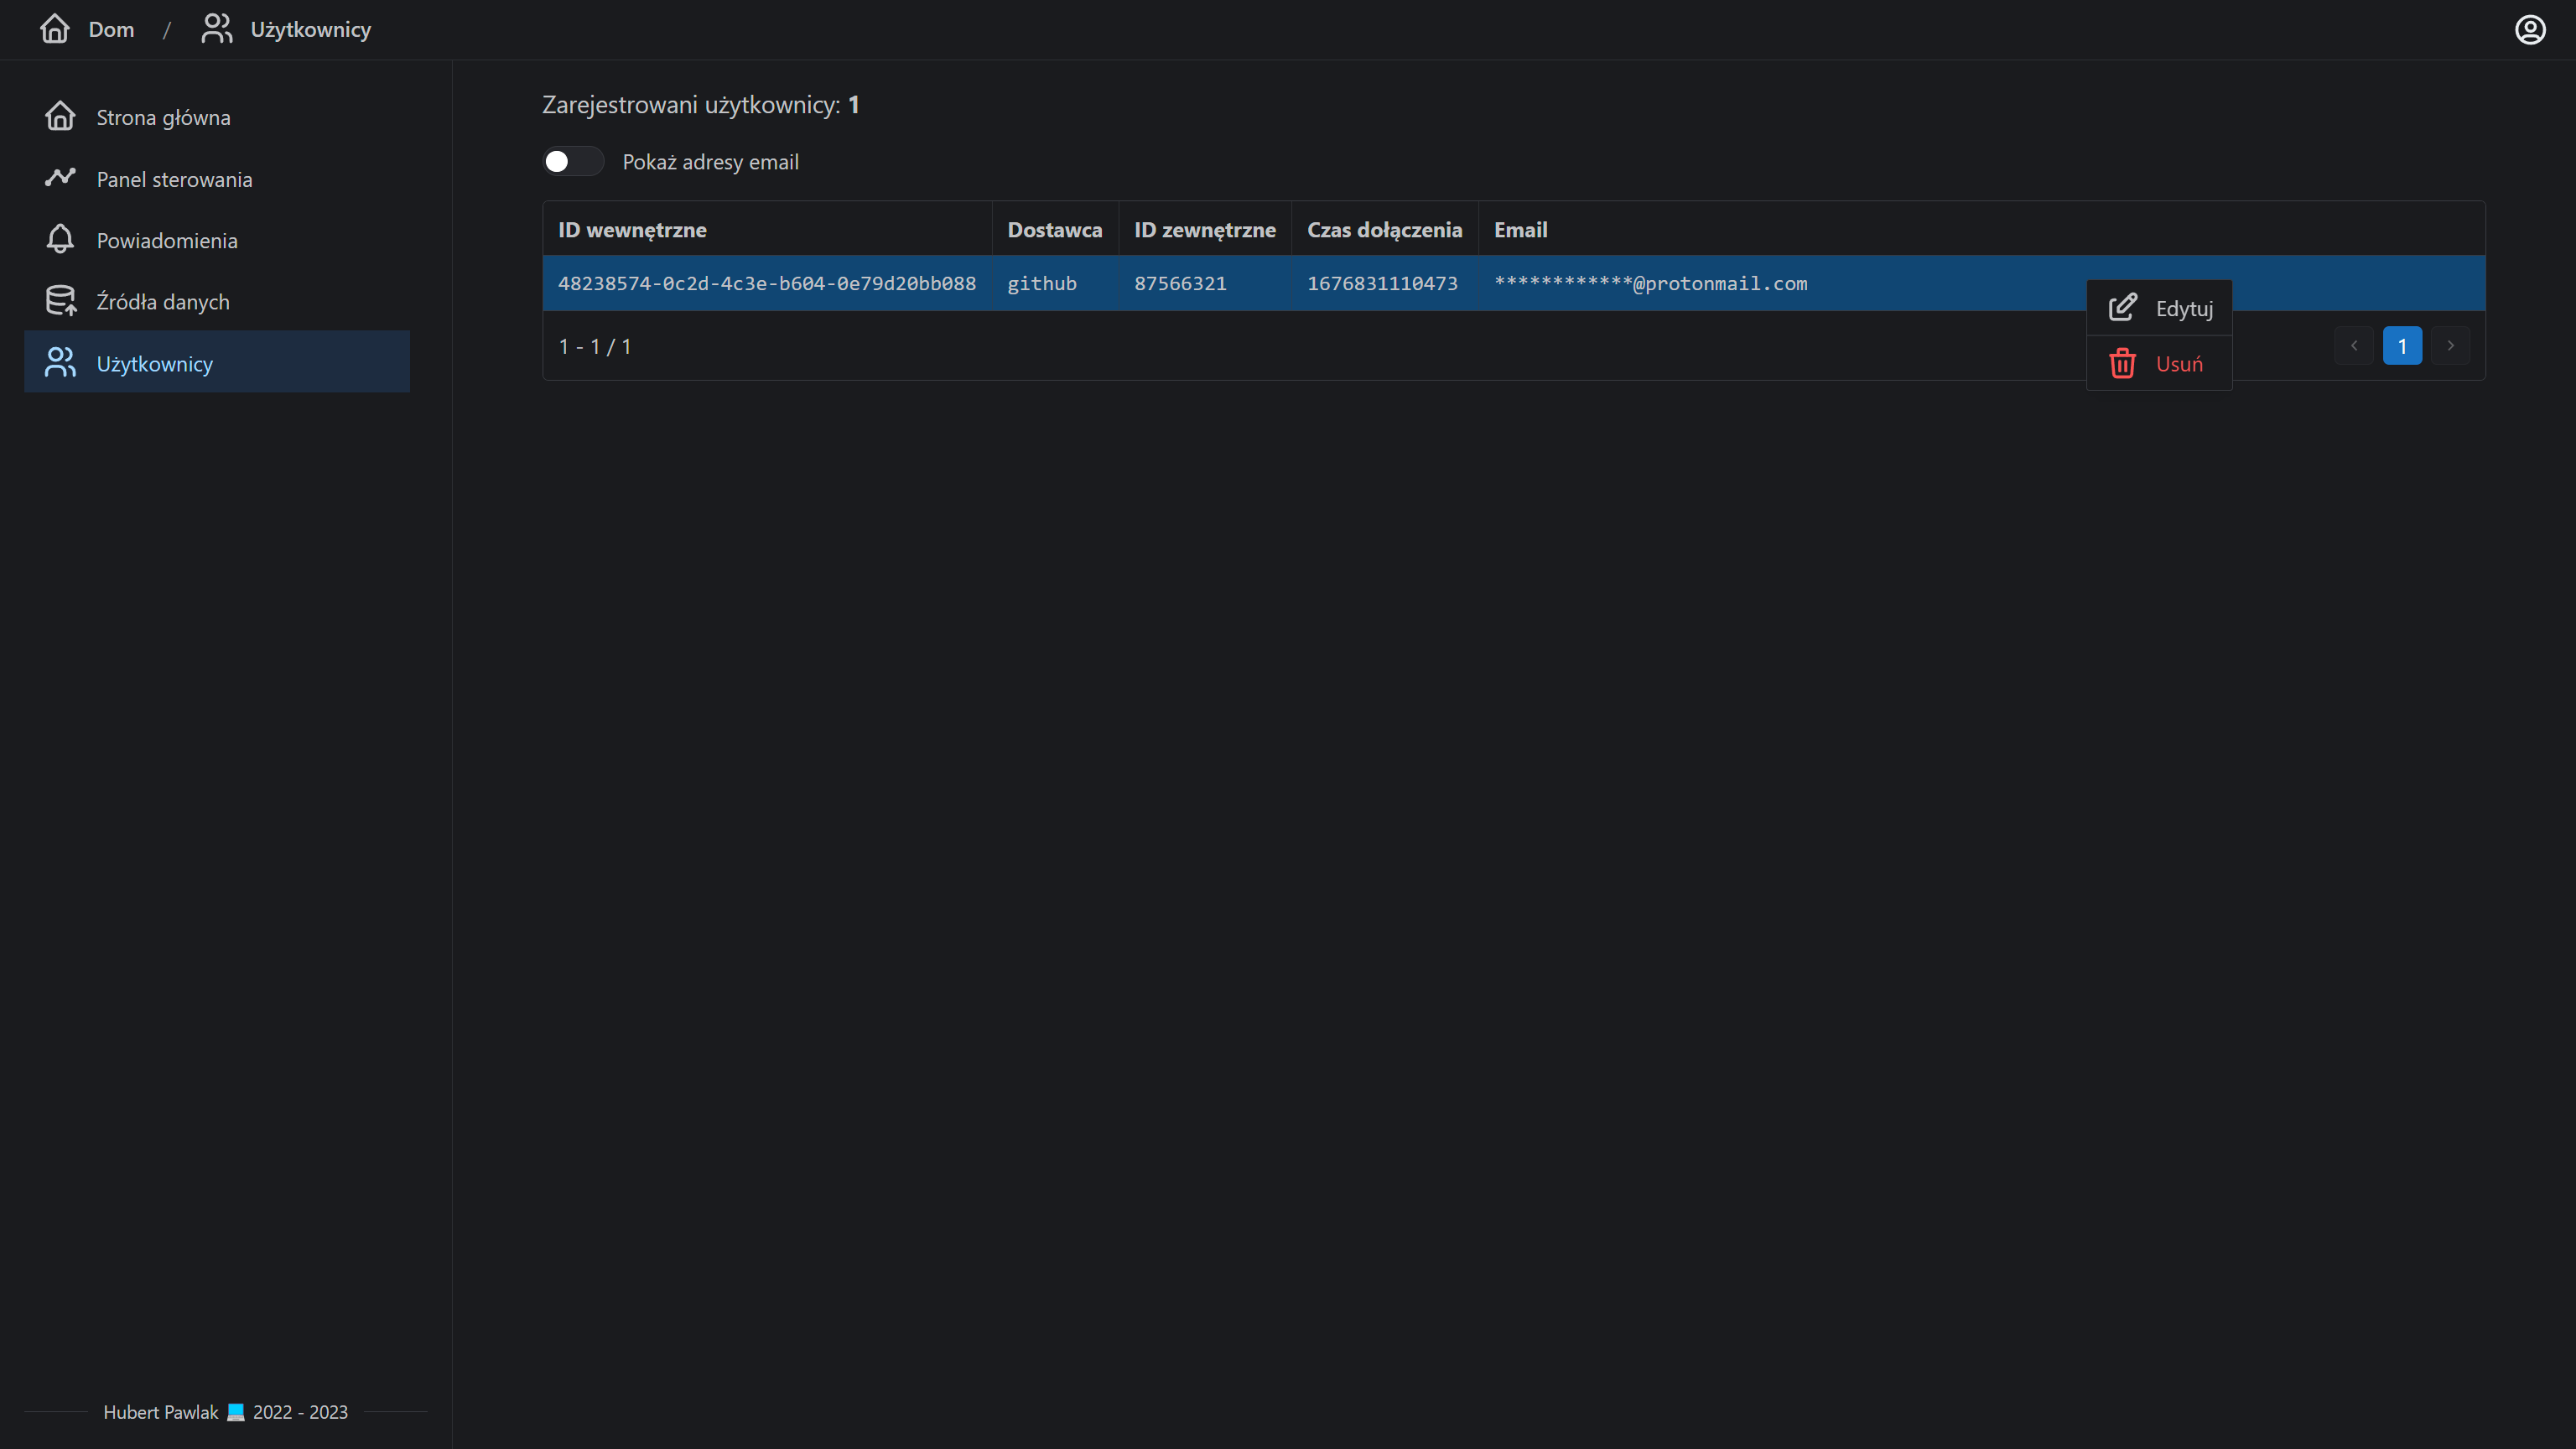 screenshot of an admin panel to manage users